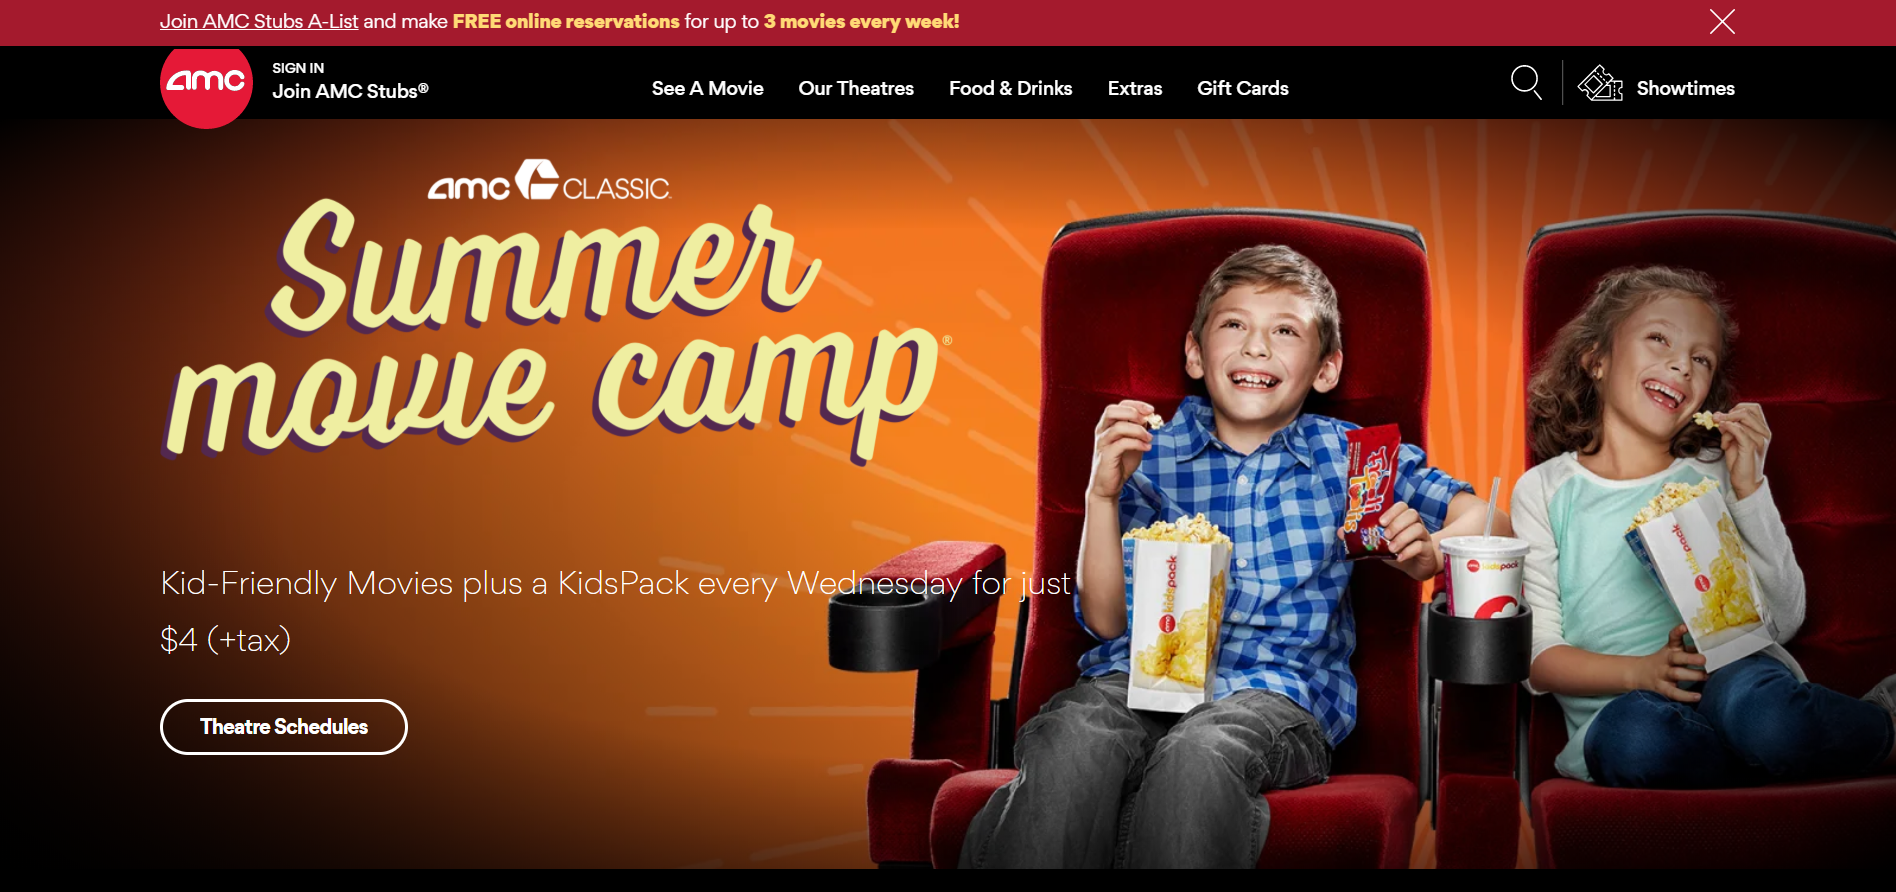 AMC launches $4 deal for kids every Wednesday this summer!